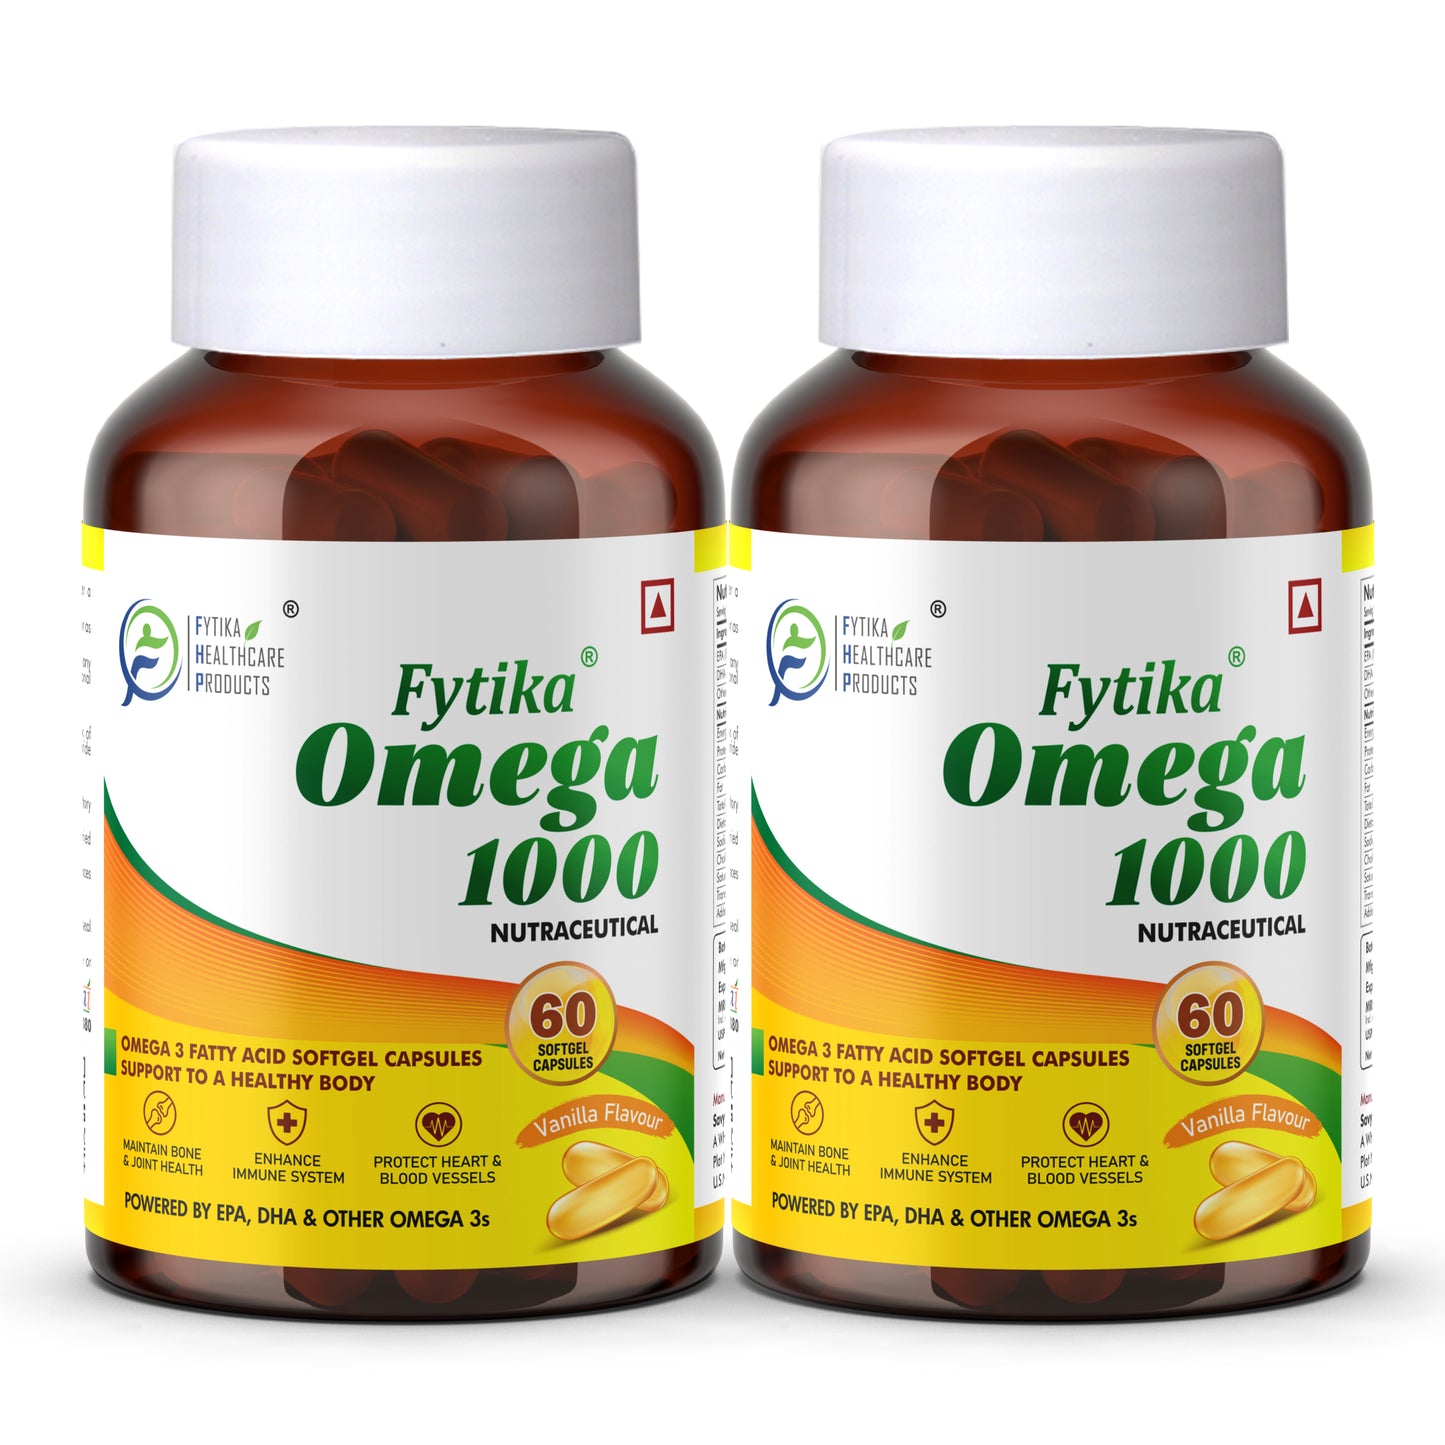 Fytika Omega 1000 - For Heart, Brain, Joint, Muscle Support, EPA 360 MG + DHA 240 MG, Omega Fatty Acids 400 MG, For Men, Women - 60 Capsules